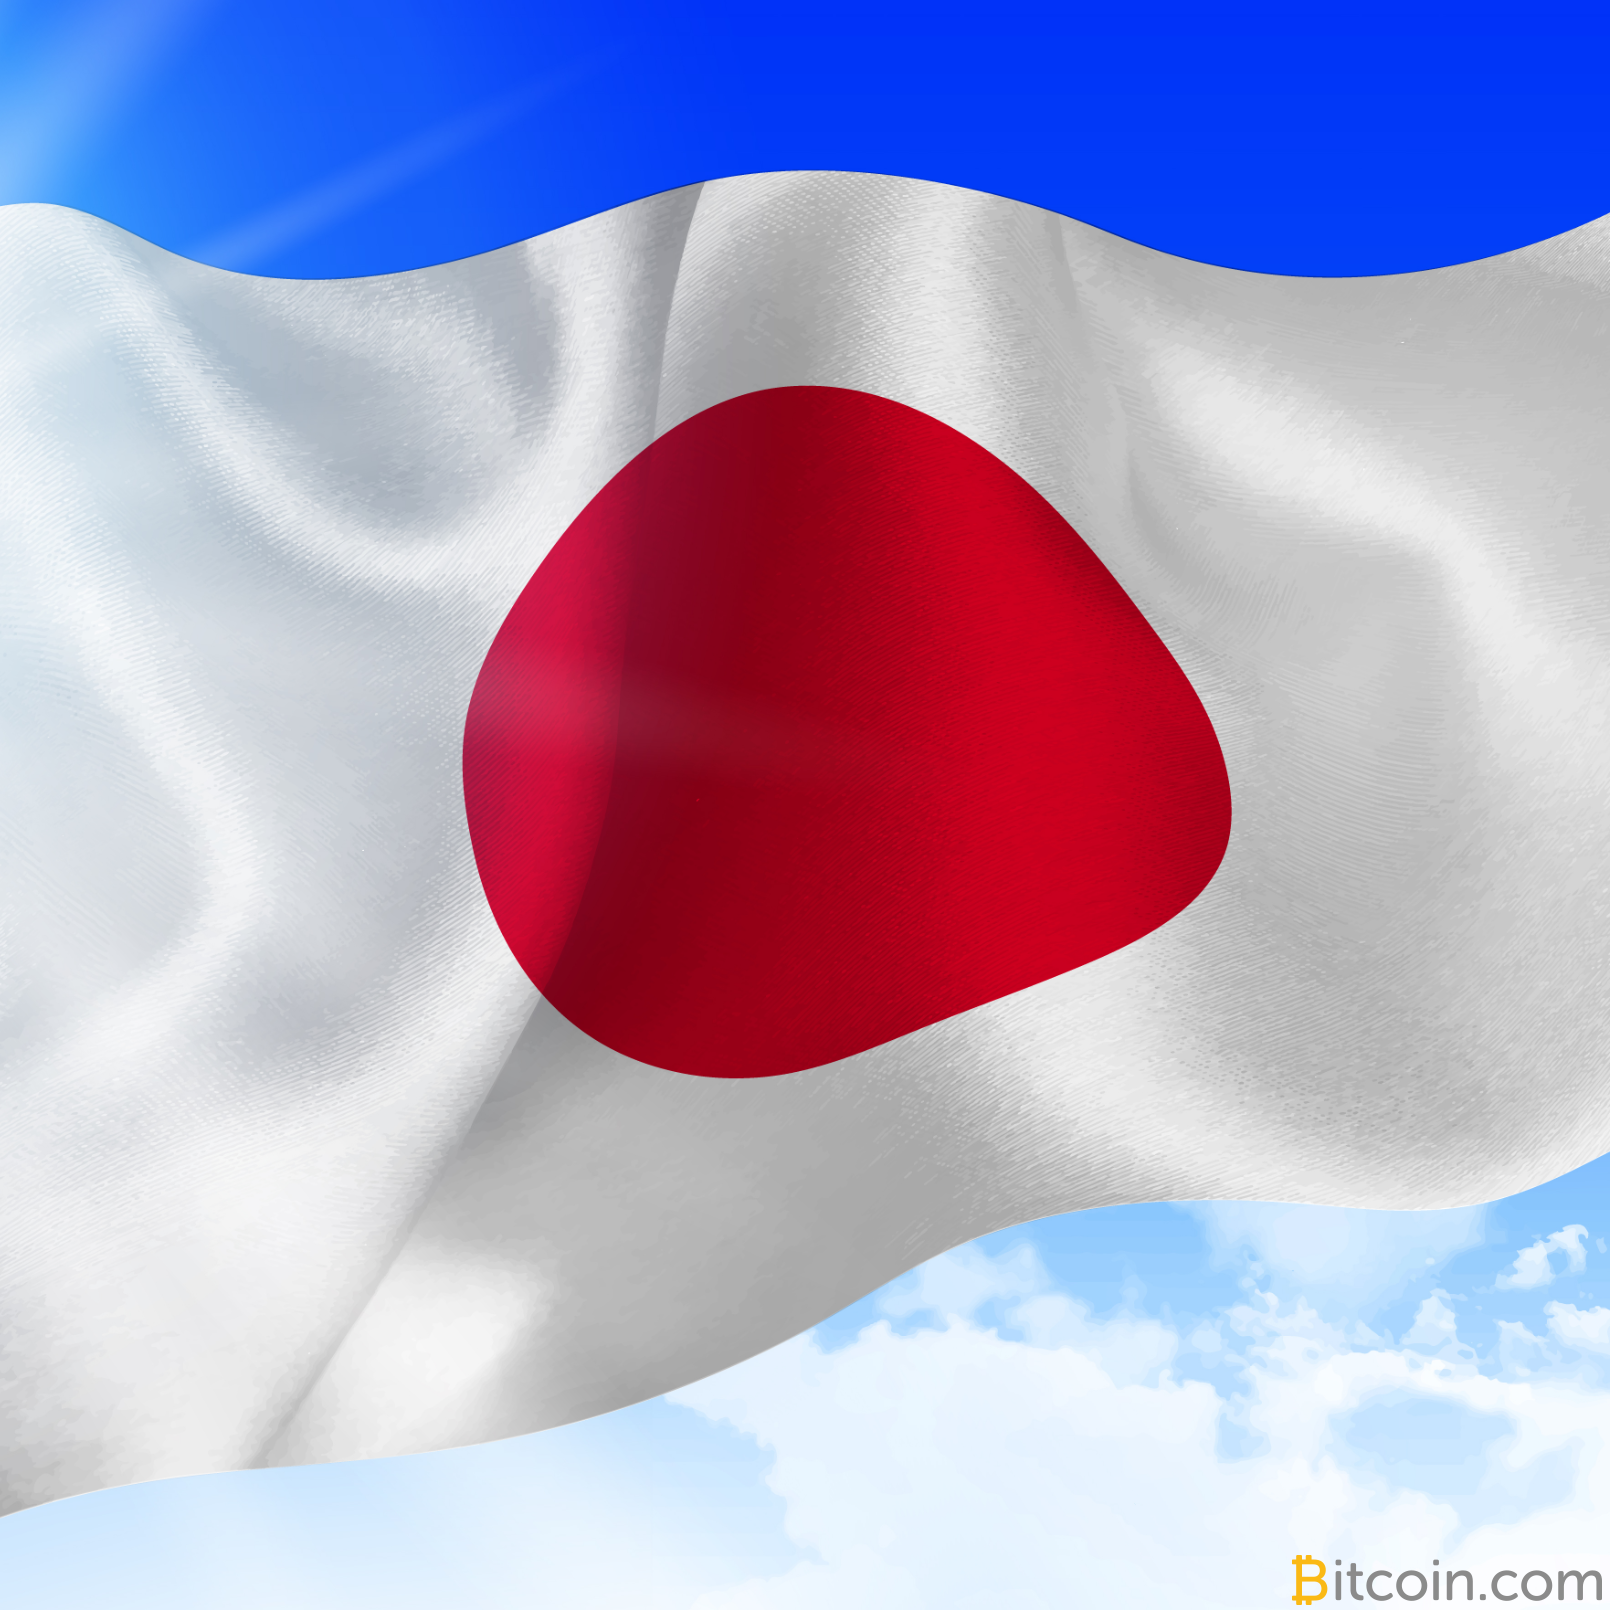 16 Government-Approved Crypto Exchanges Forming Self-Regulatory Body in Japan